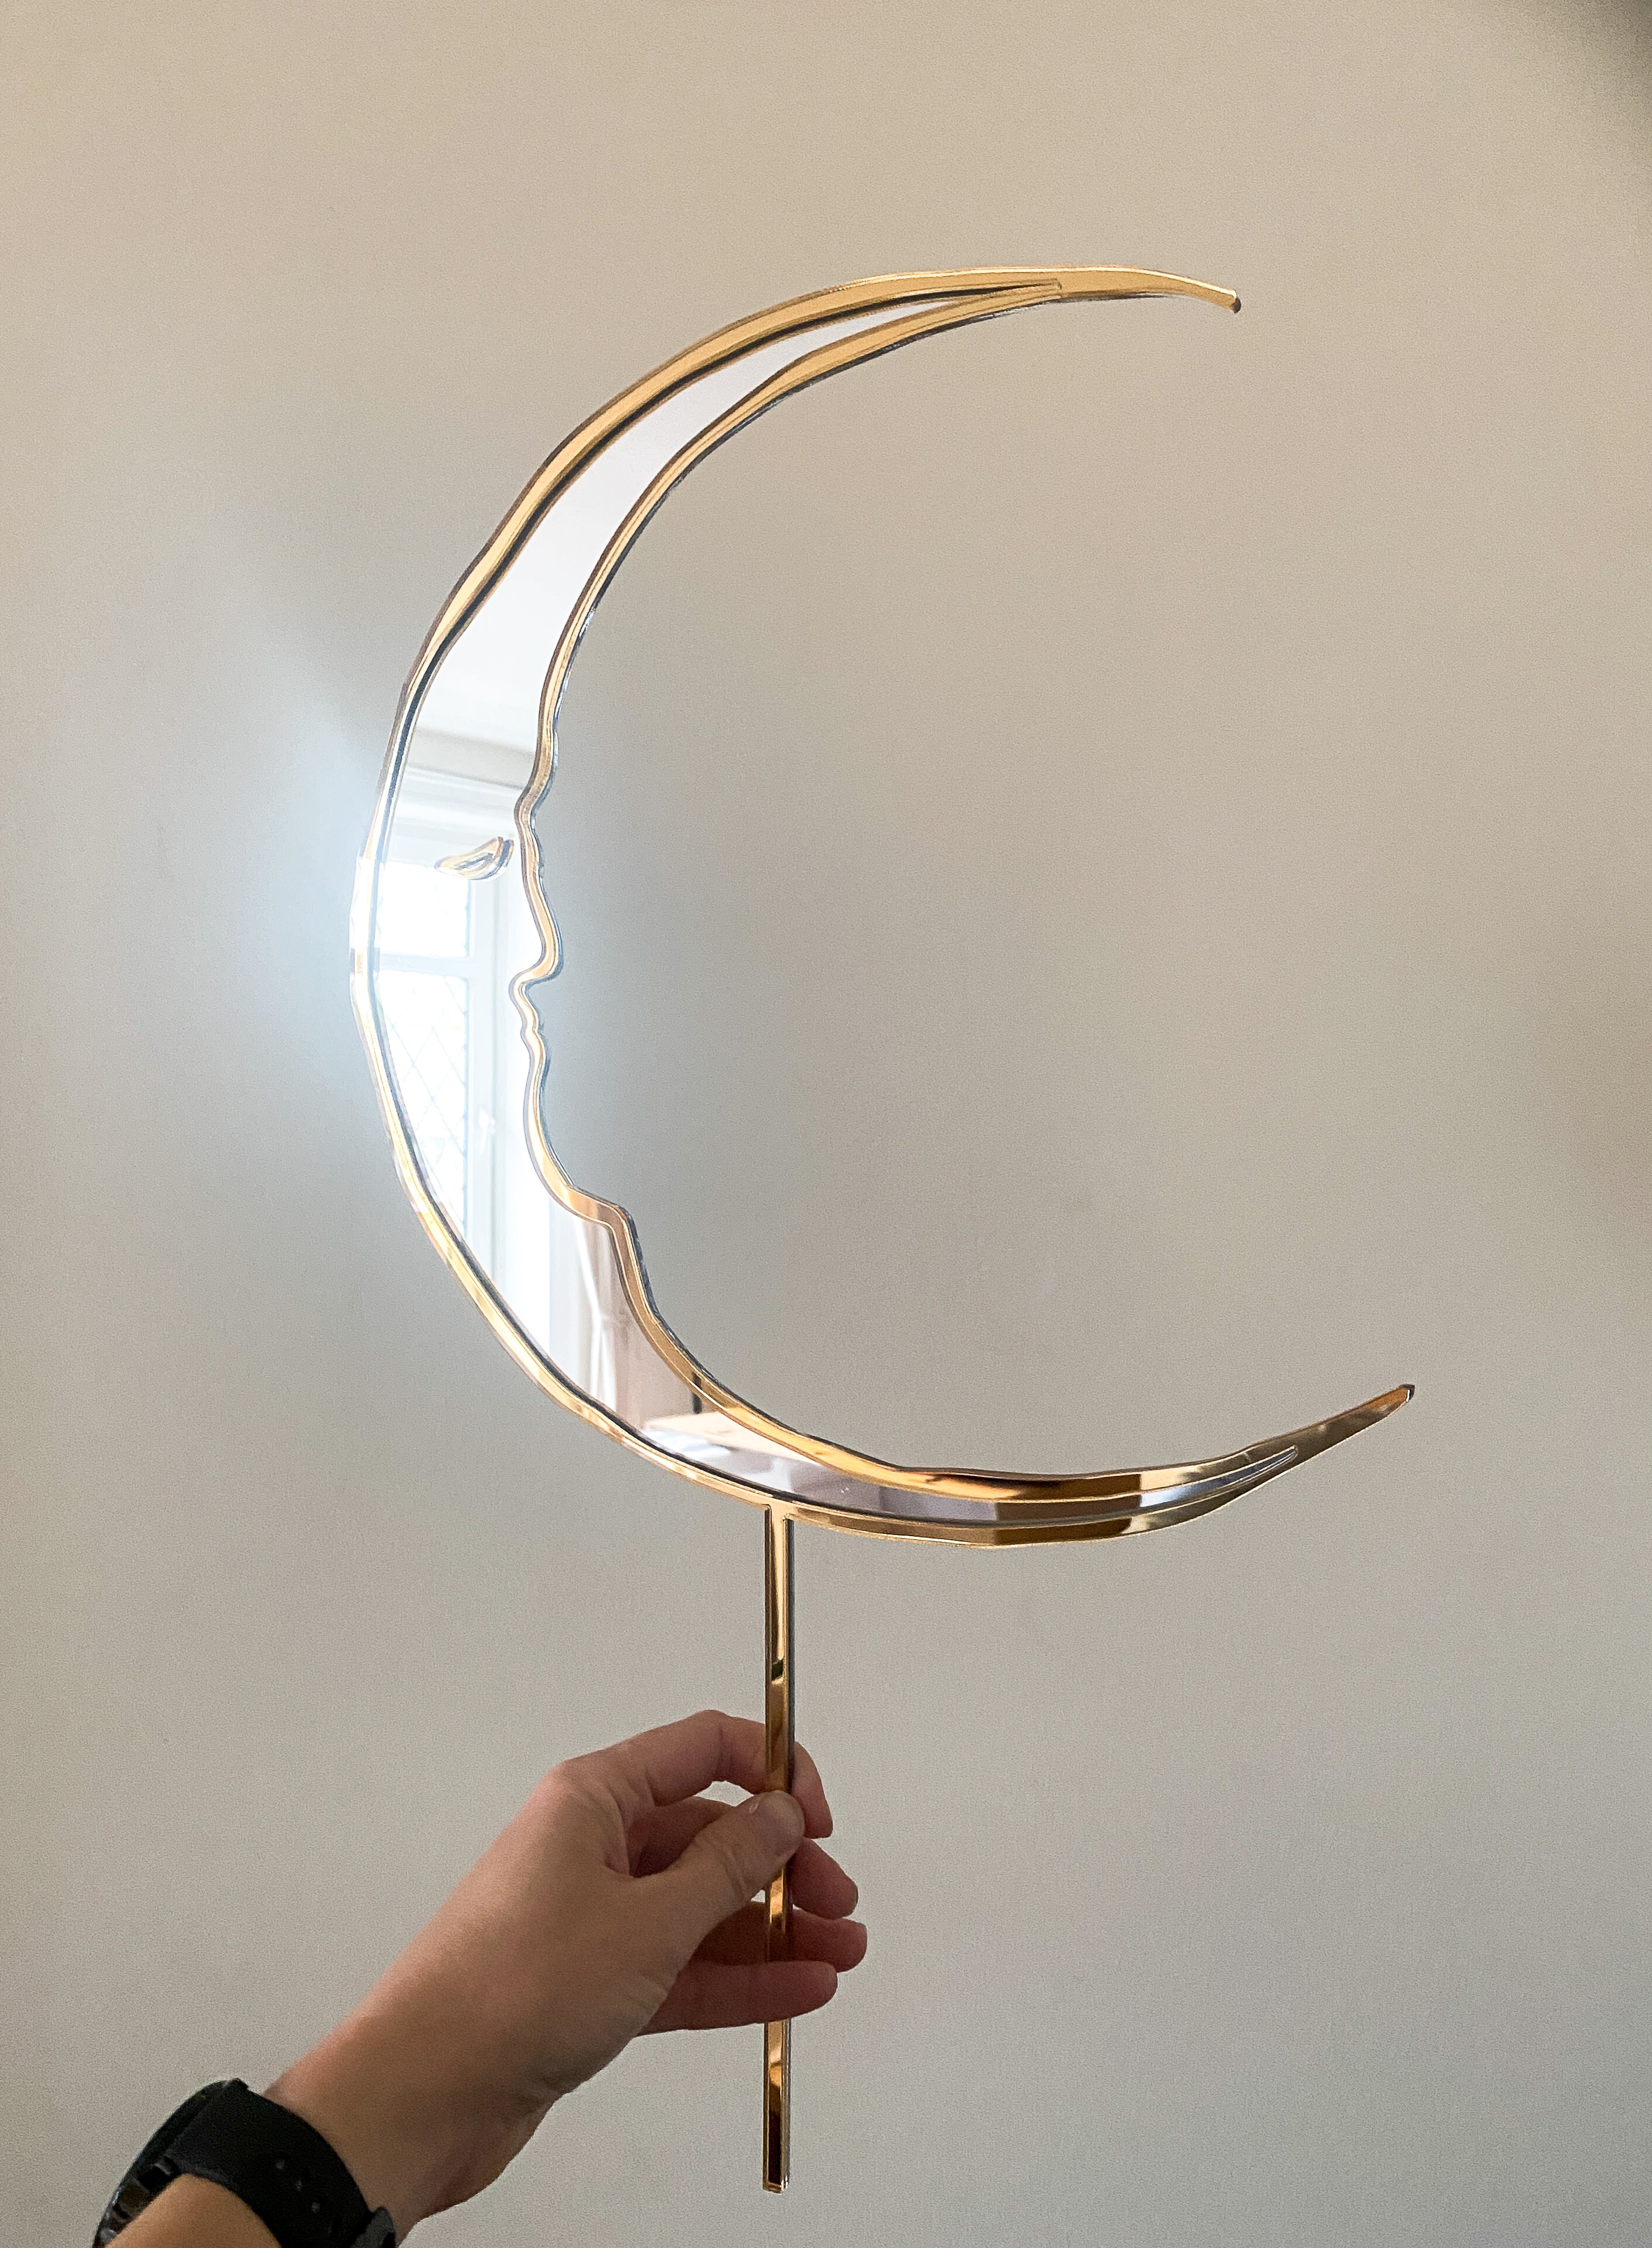 Giant Crescent Moon Christmas Tree Topper